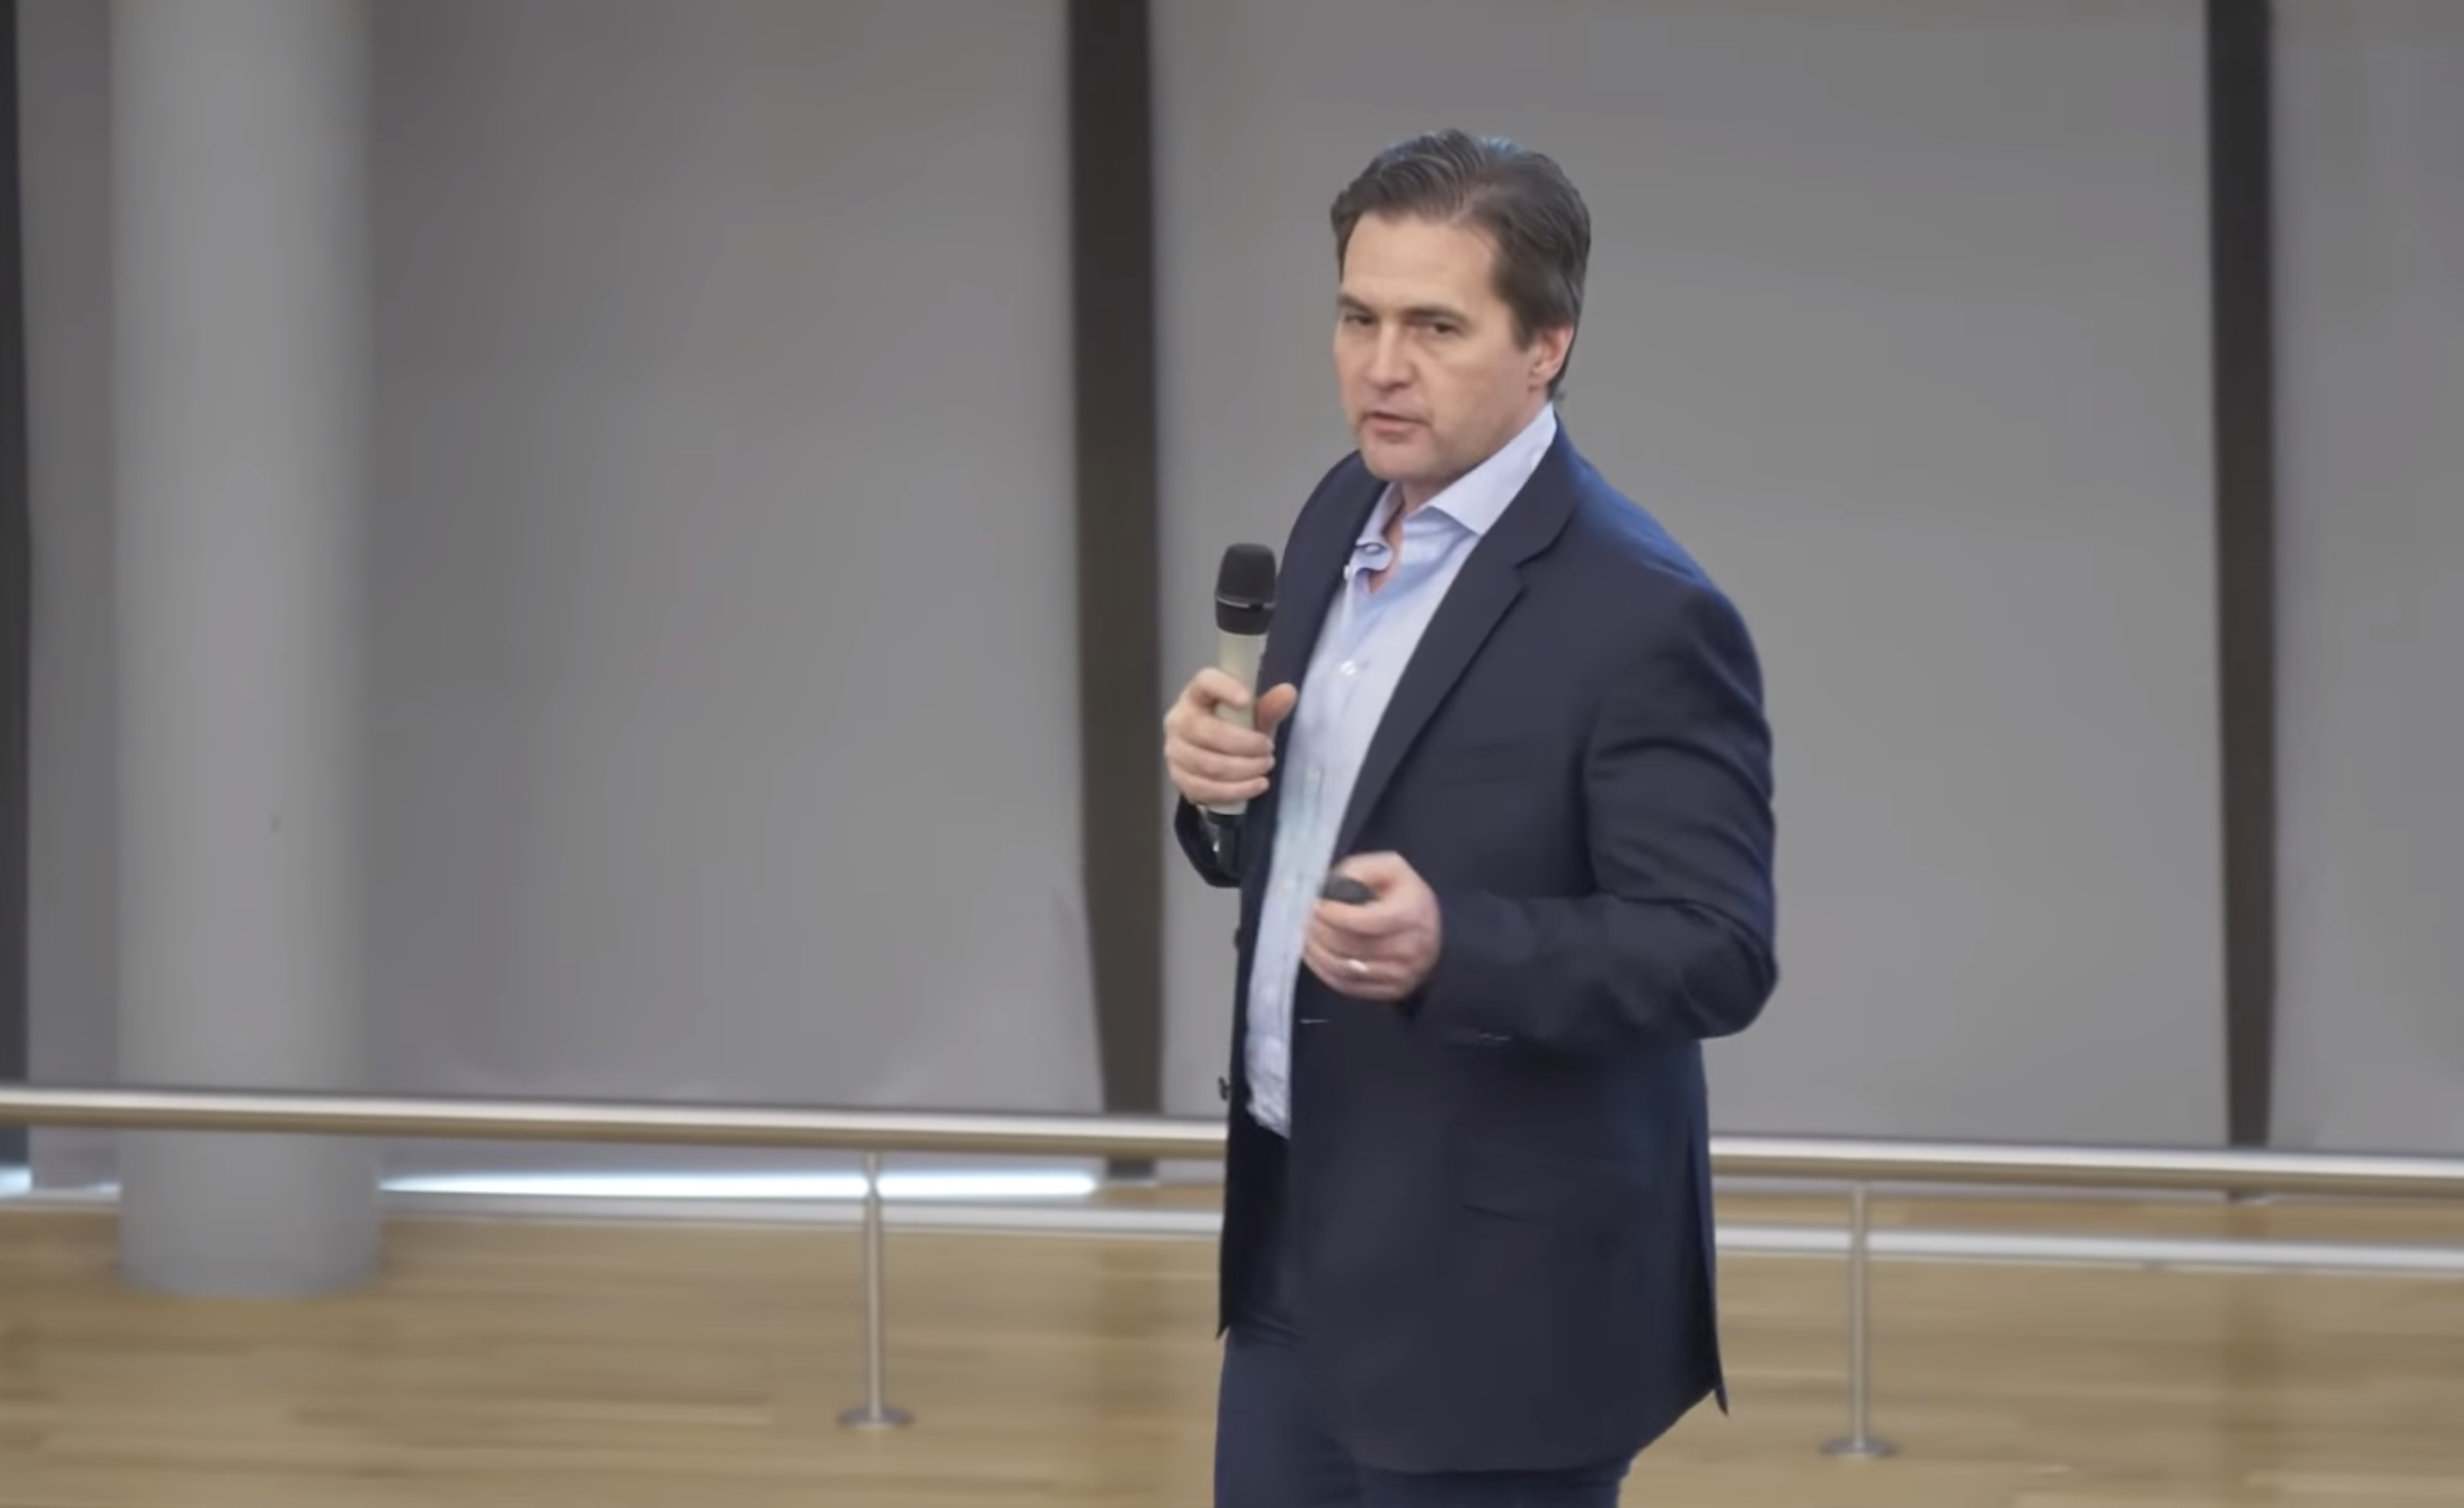 Craig-wright-doubles-down-on-satoshi-claim,-says-bitcoin-core-infringes-his-‘database-rights’